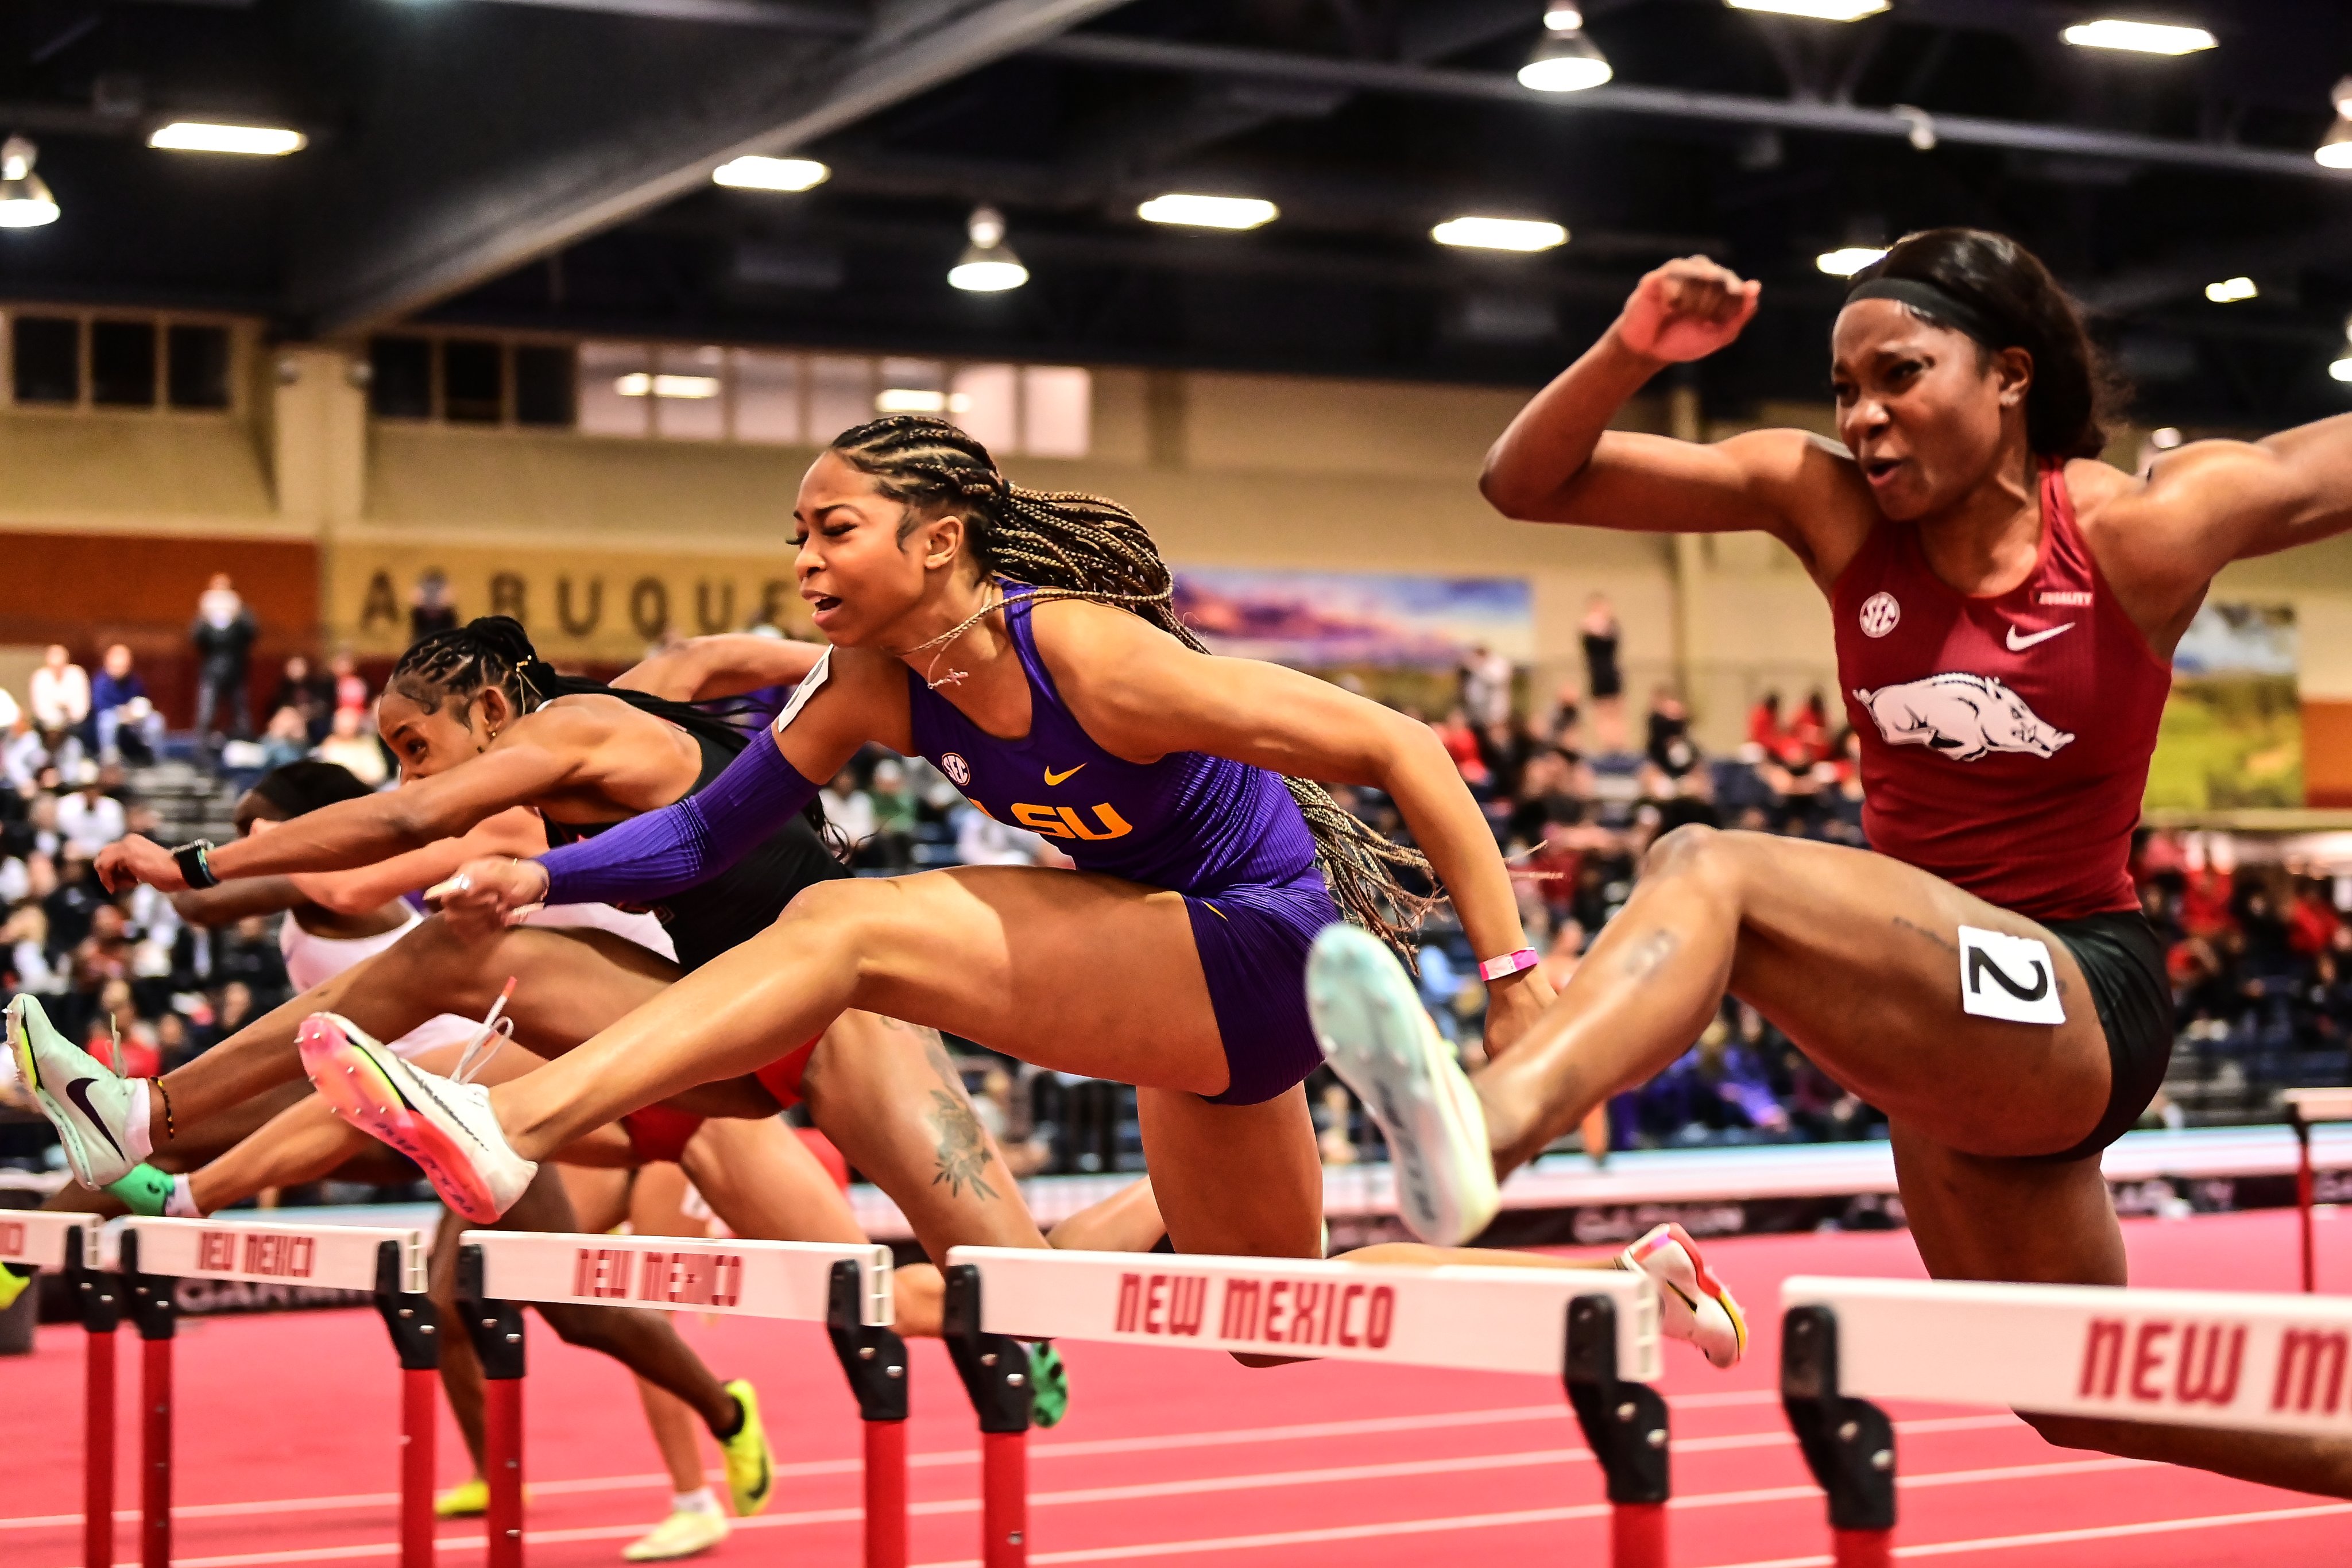 LSU’s Ofili, Phillips register firstplace finishes in New Mexico